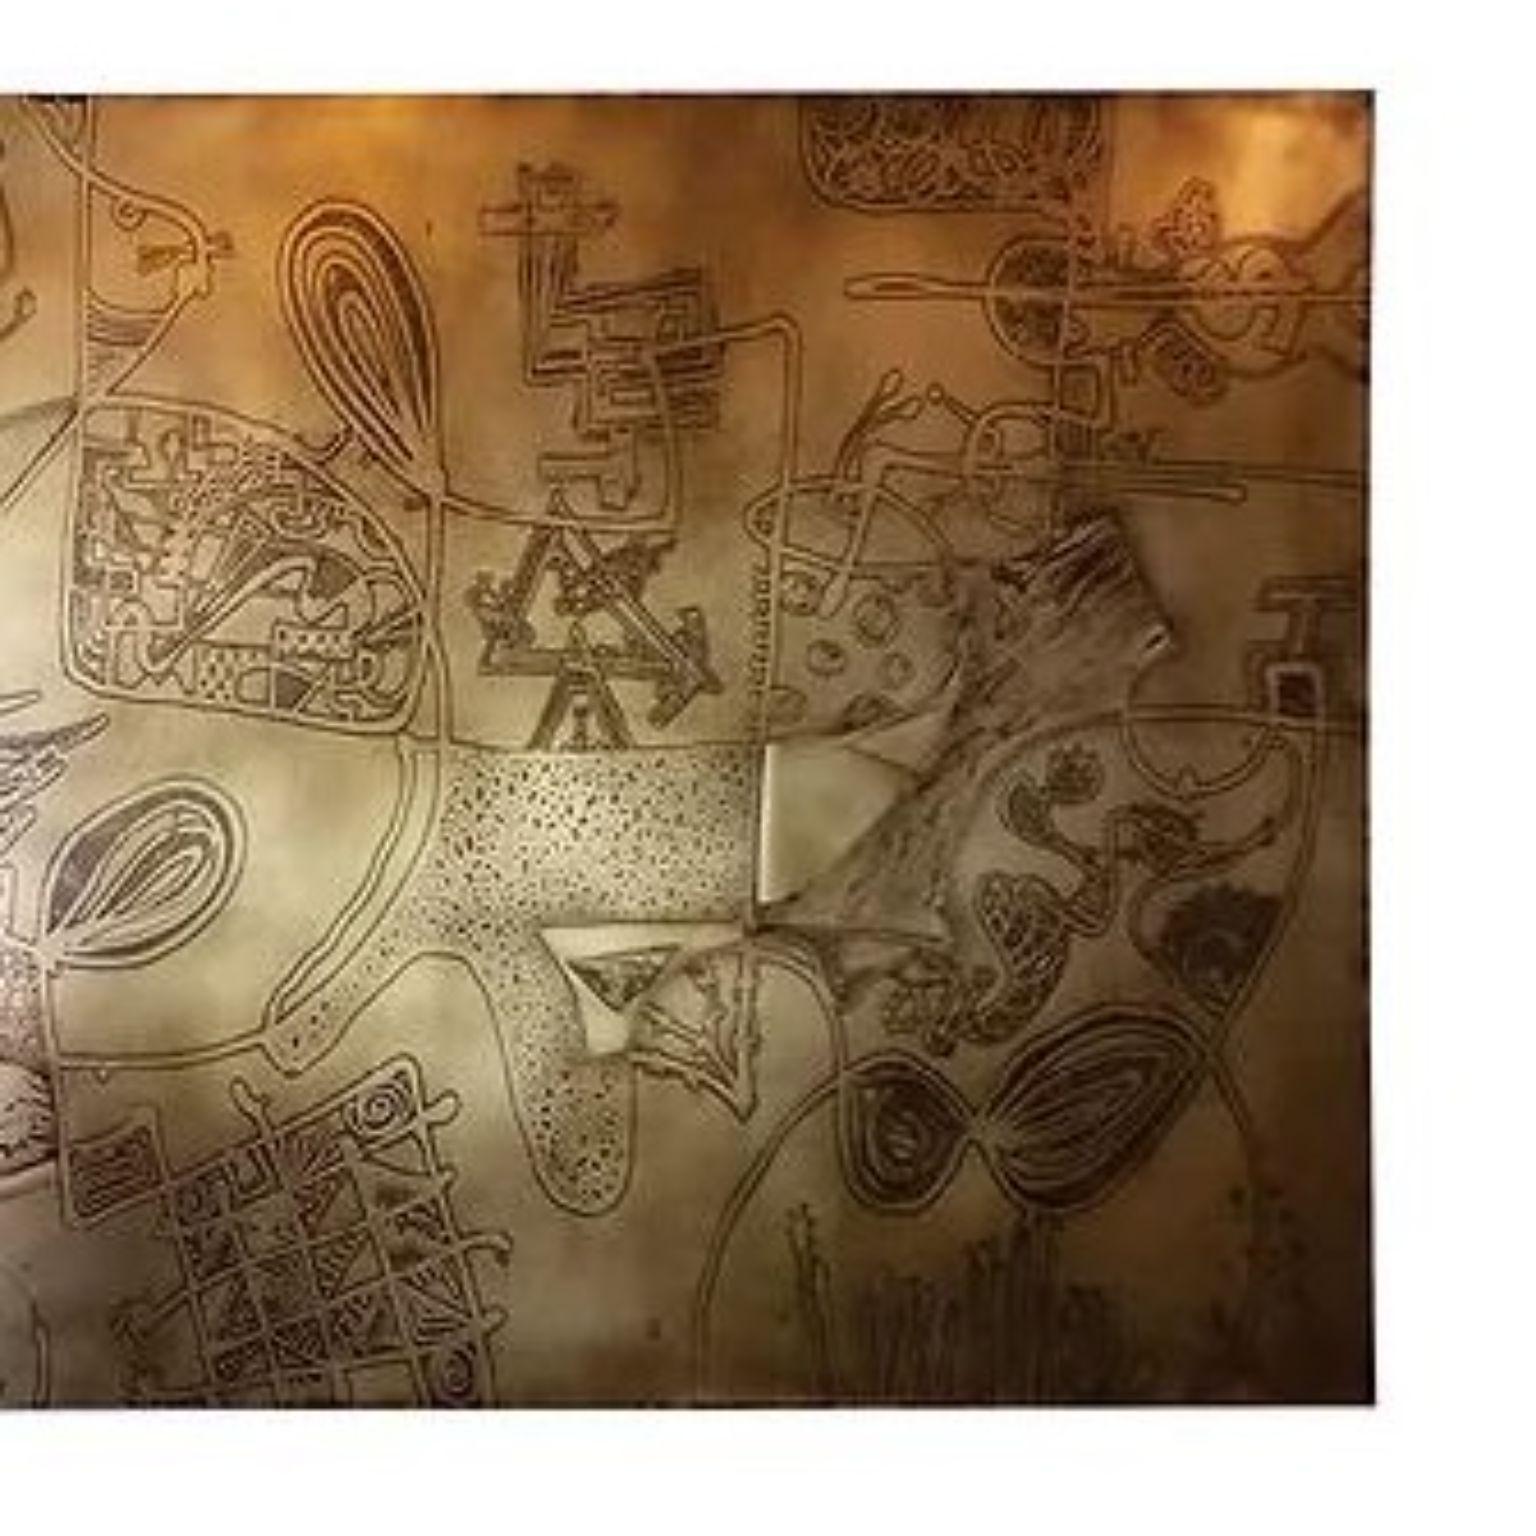 Zoo Brass Wall Panel by Brutalist Be
One Of A Kind
Dimensions: D 2 x W 200 x H 100 cm.
Materials: Brass.

Brass acid etched black patinated wall decor. A hand drawn brass inspired by Joan Miro with solid brass pieces.

Available in copper and in